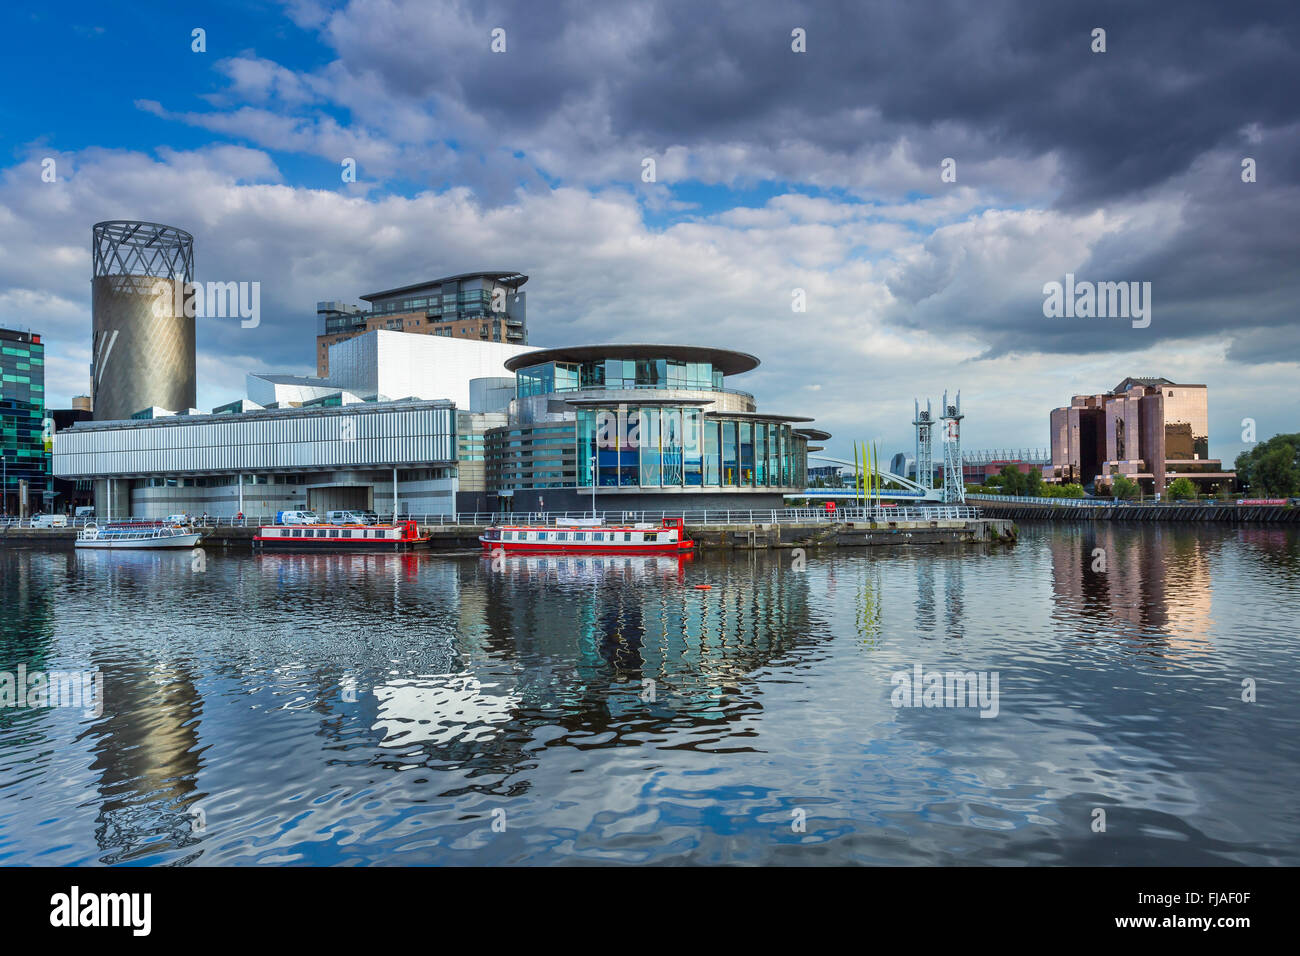 Salford Quays theatre seen across the basin. Stock Photo